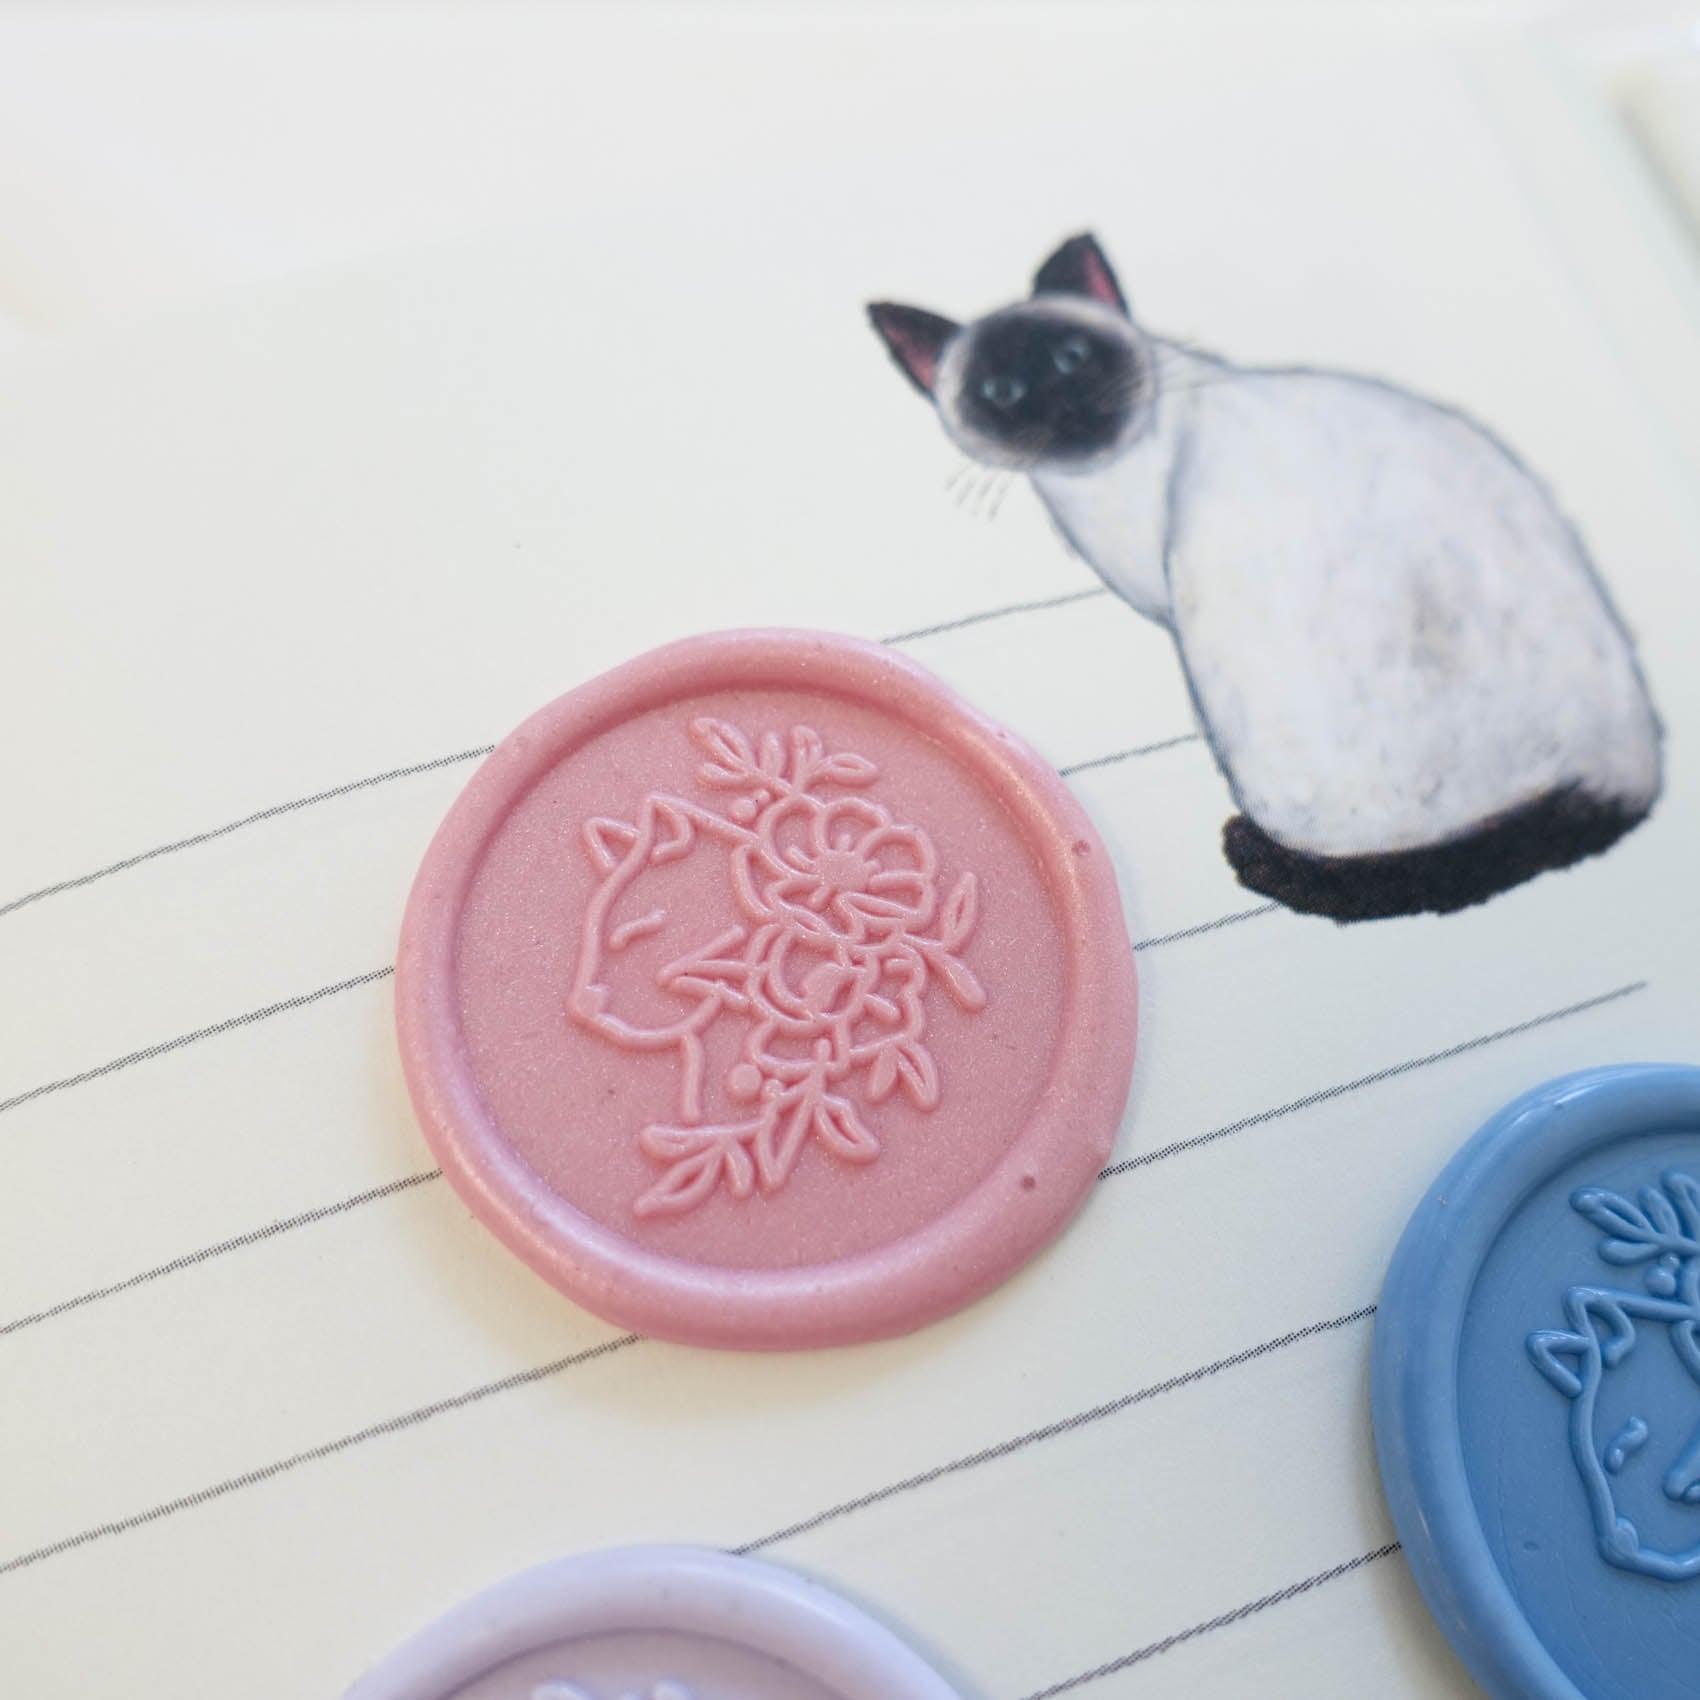 Floral Cat Portrait wax seal stamp, wax seal kit or stamp head